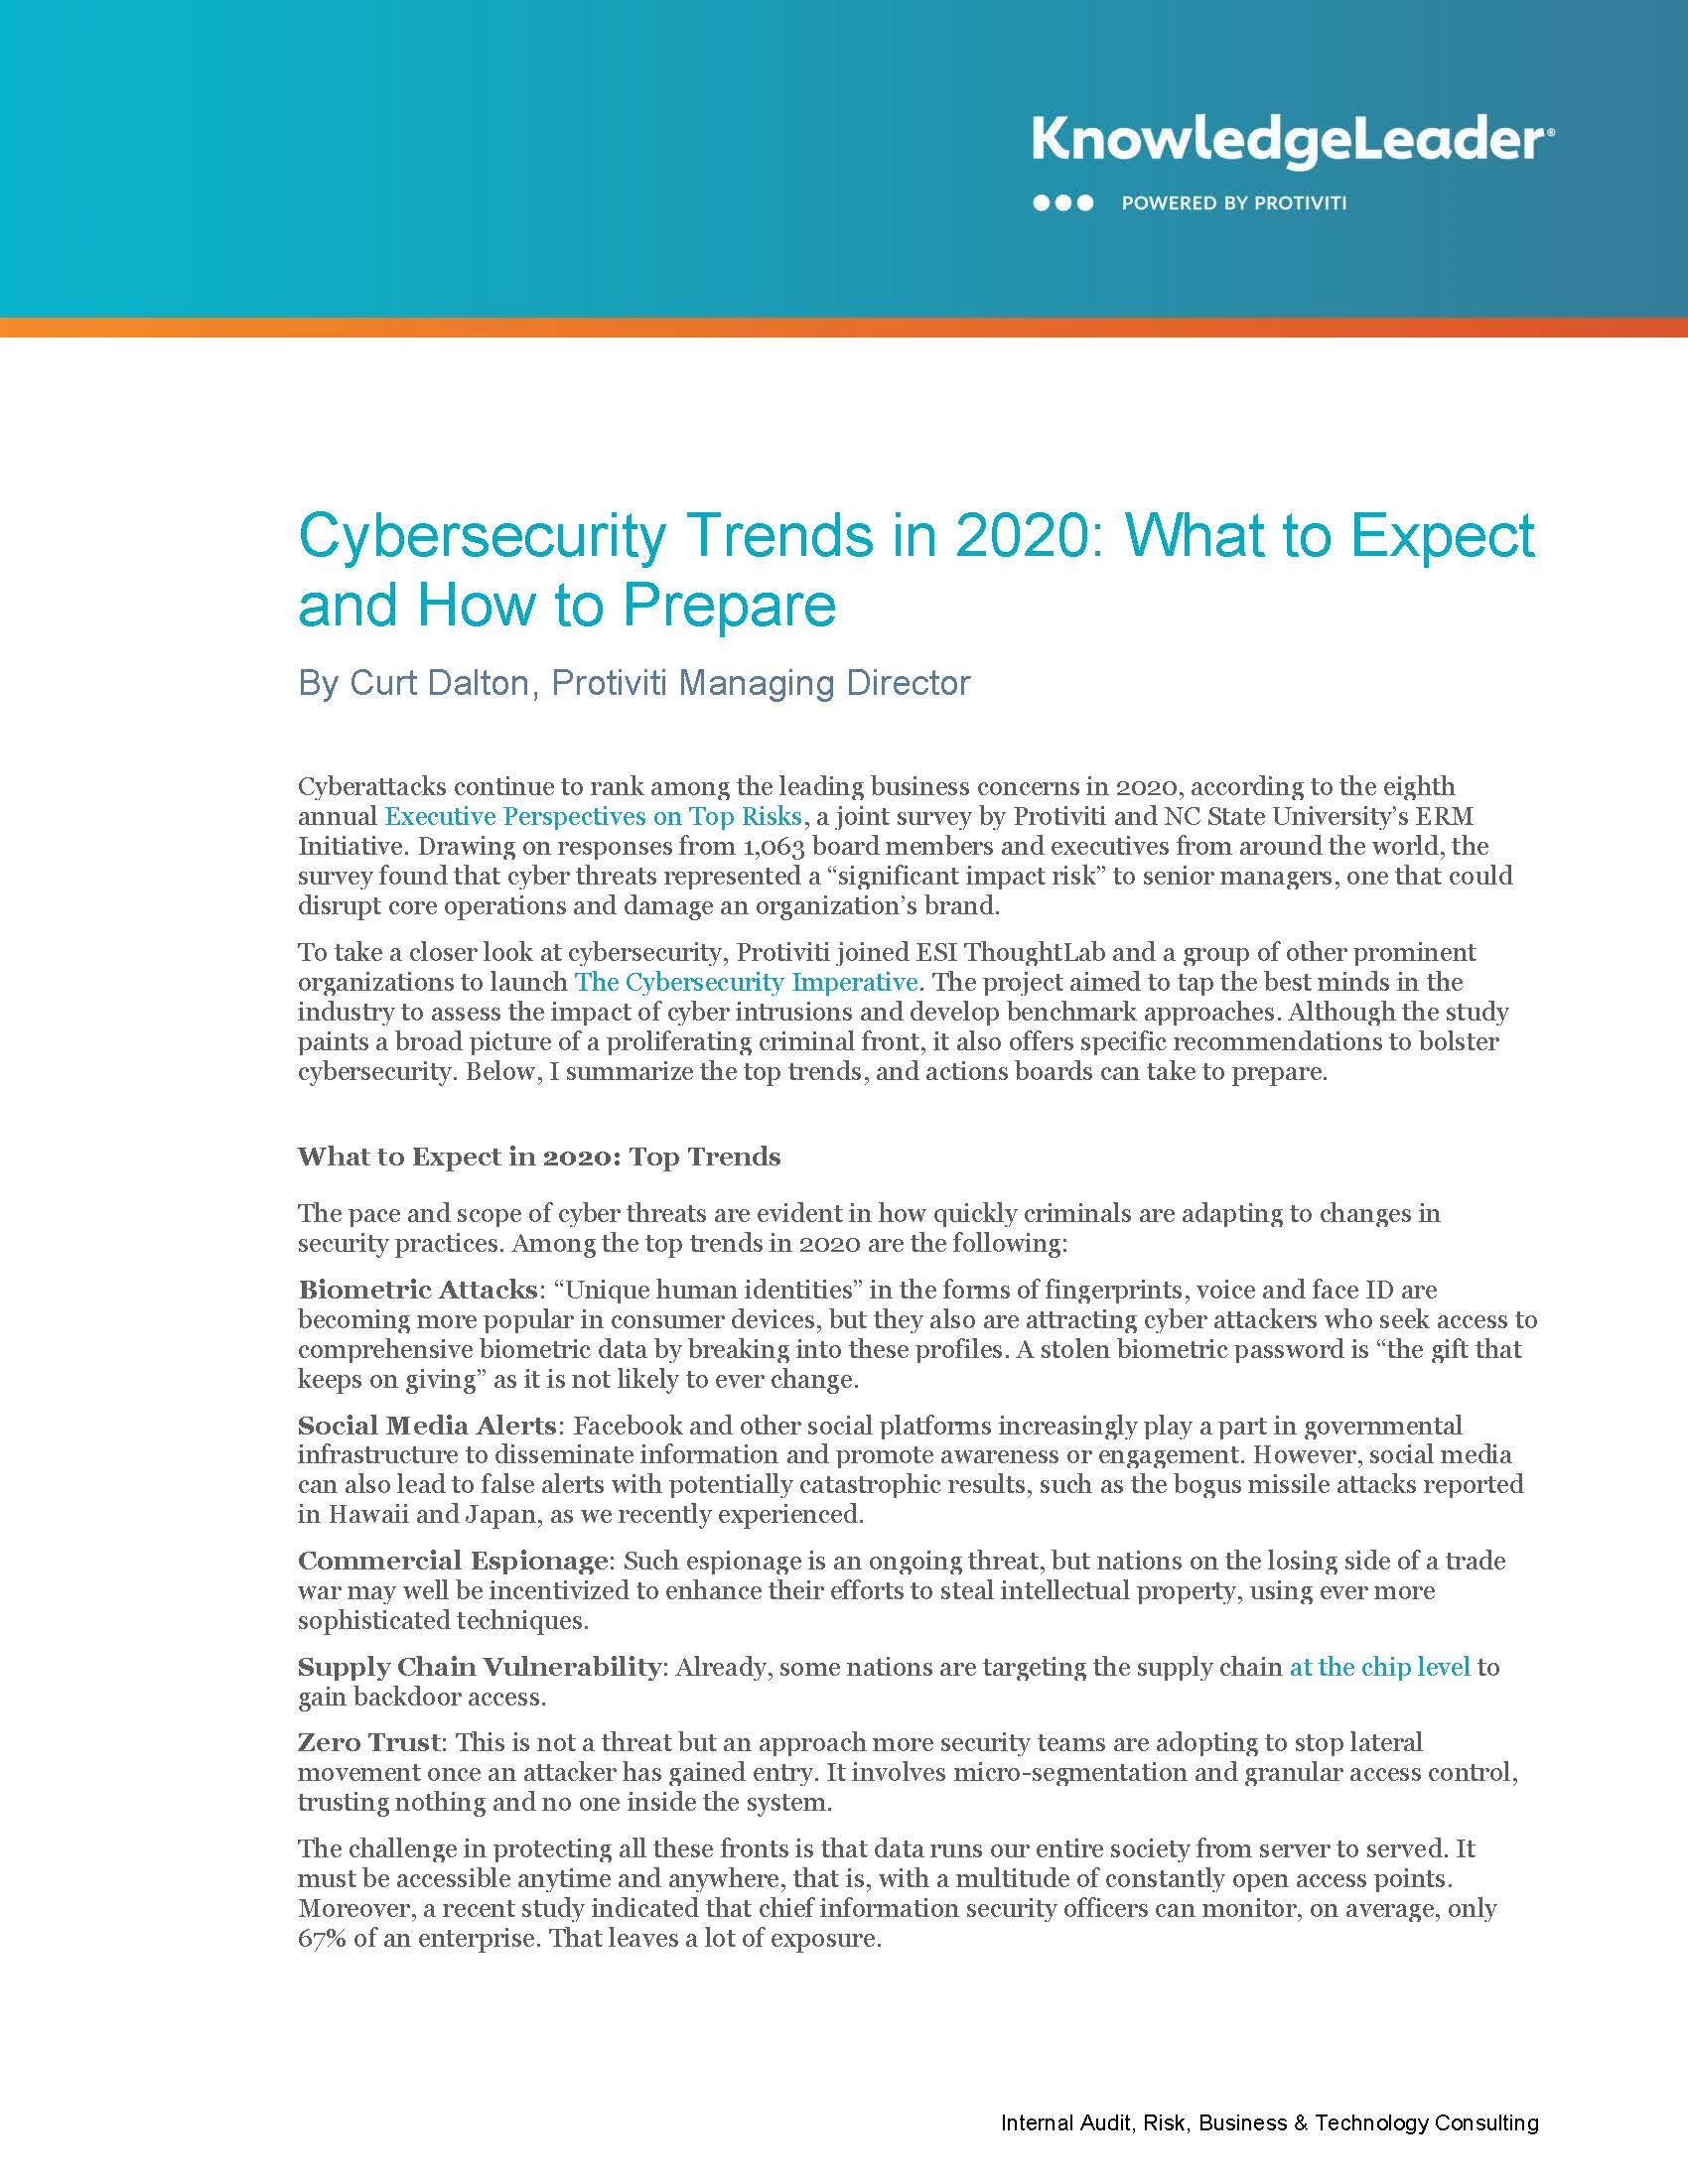 Cybersecurity Trends in 2020 What to Expect and How to Prepare 